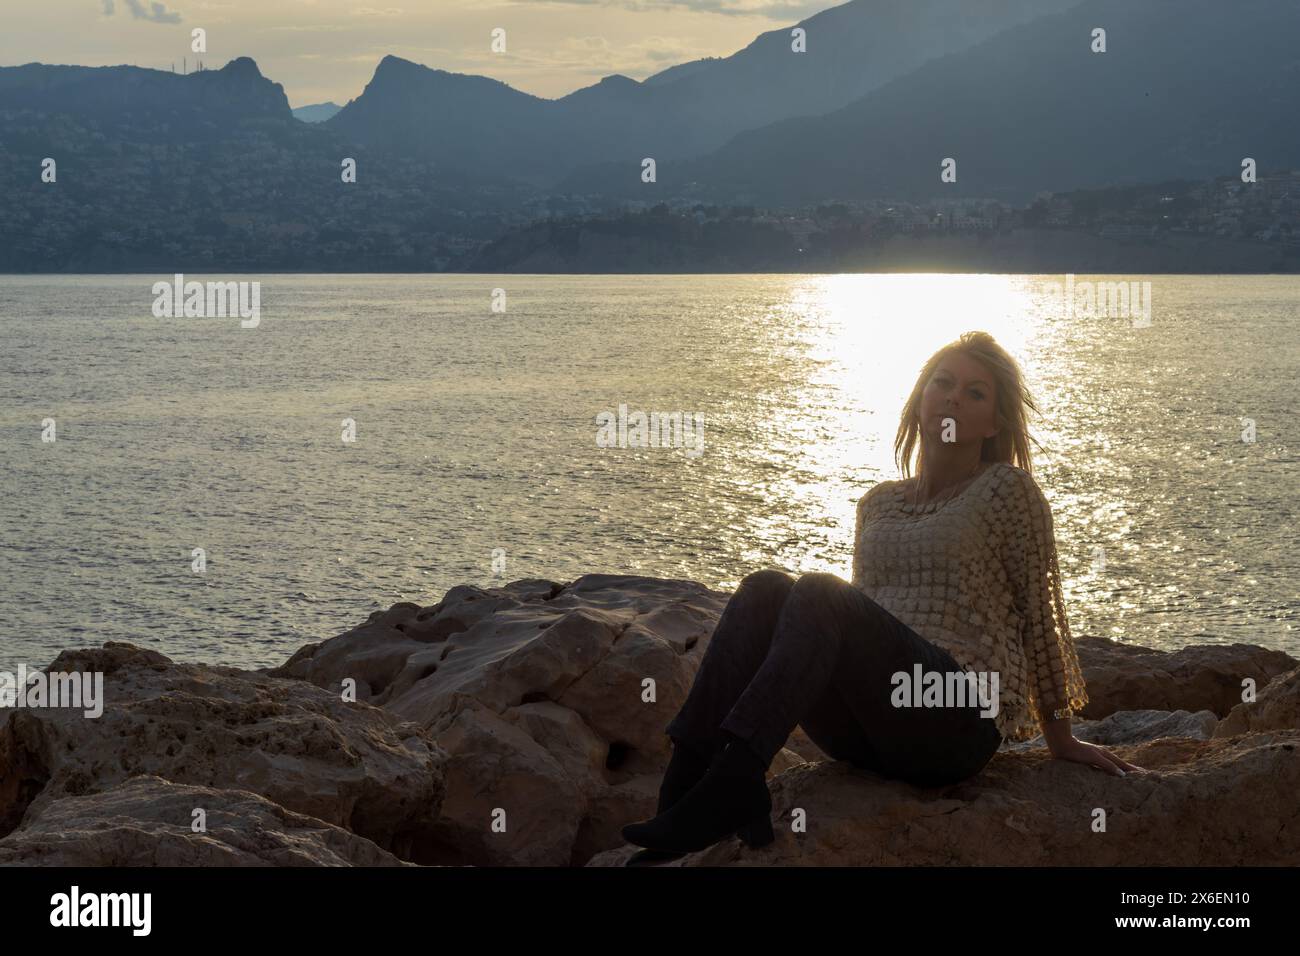 This portrait captures a woman in a moment of serene reflection on the rocky shores of Calpe, Spain. Stock Photo